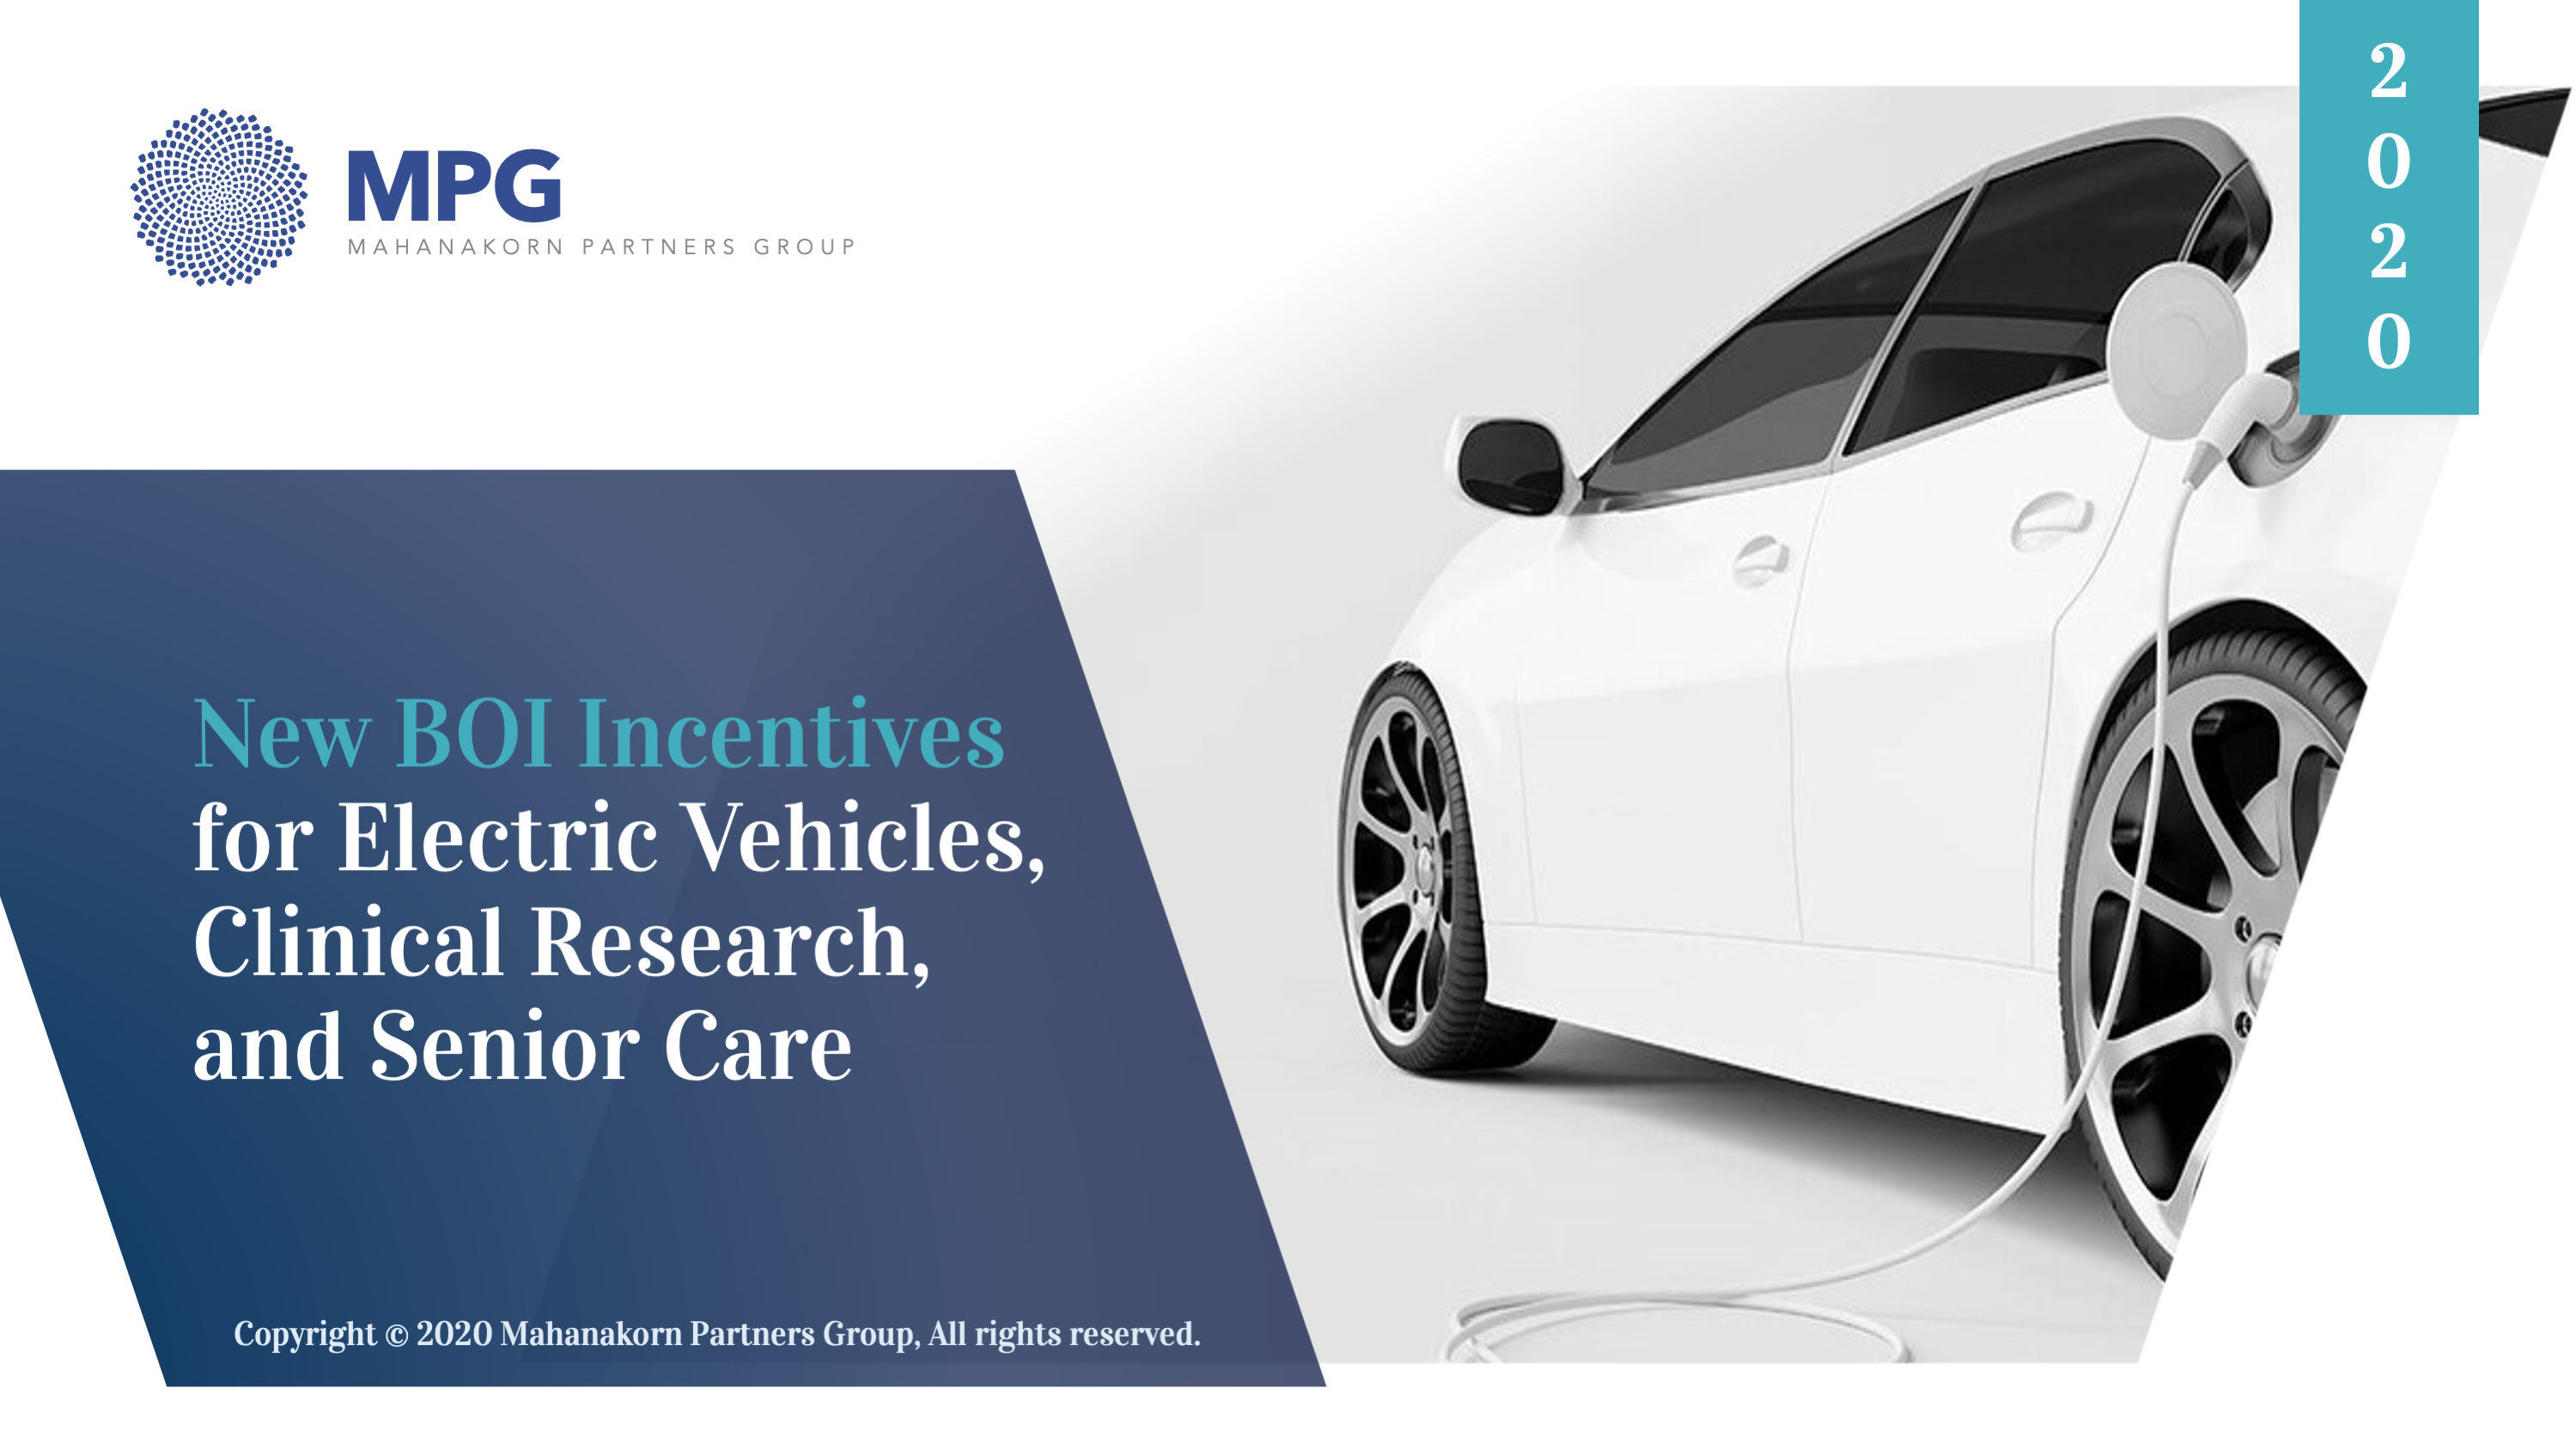 New BOI Incentives for Electric Vehicles, Clinical Research, and Senior